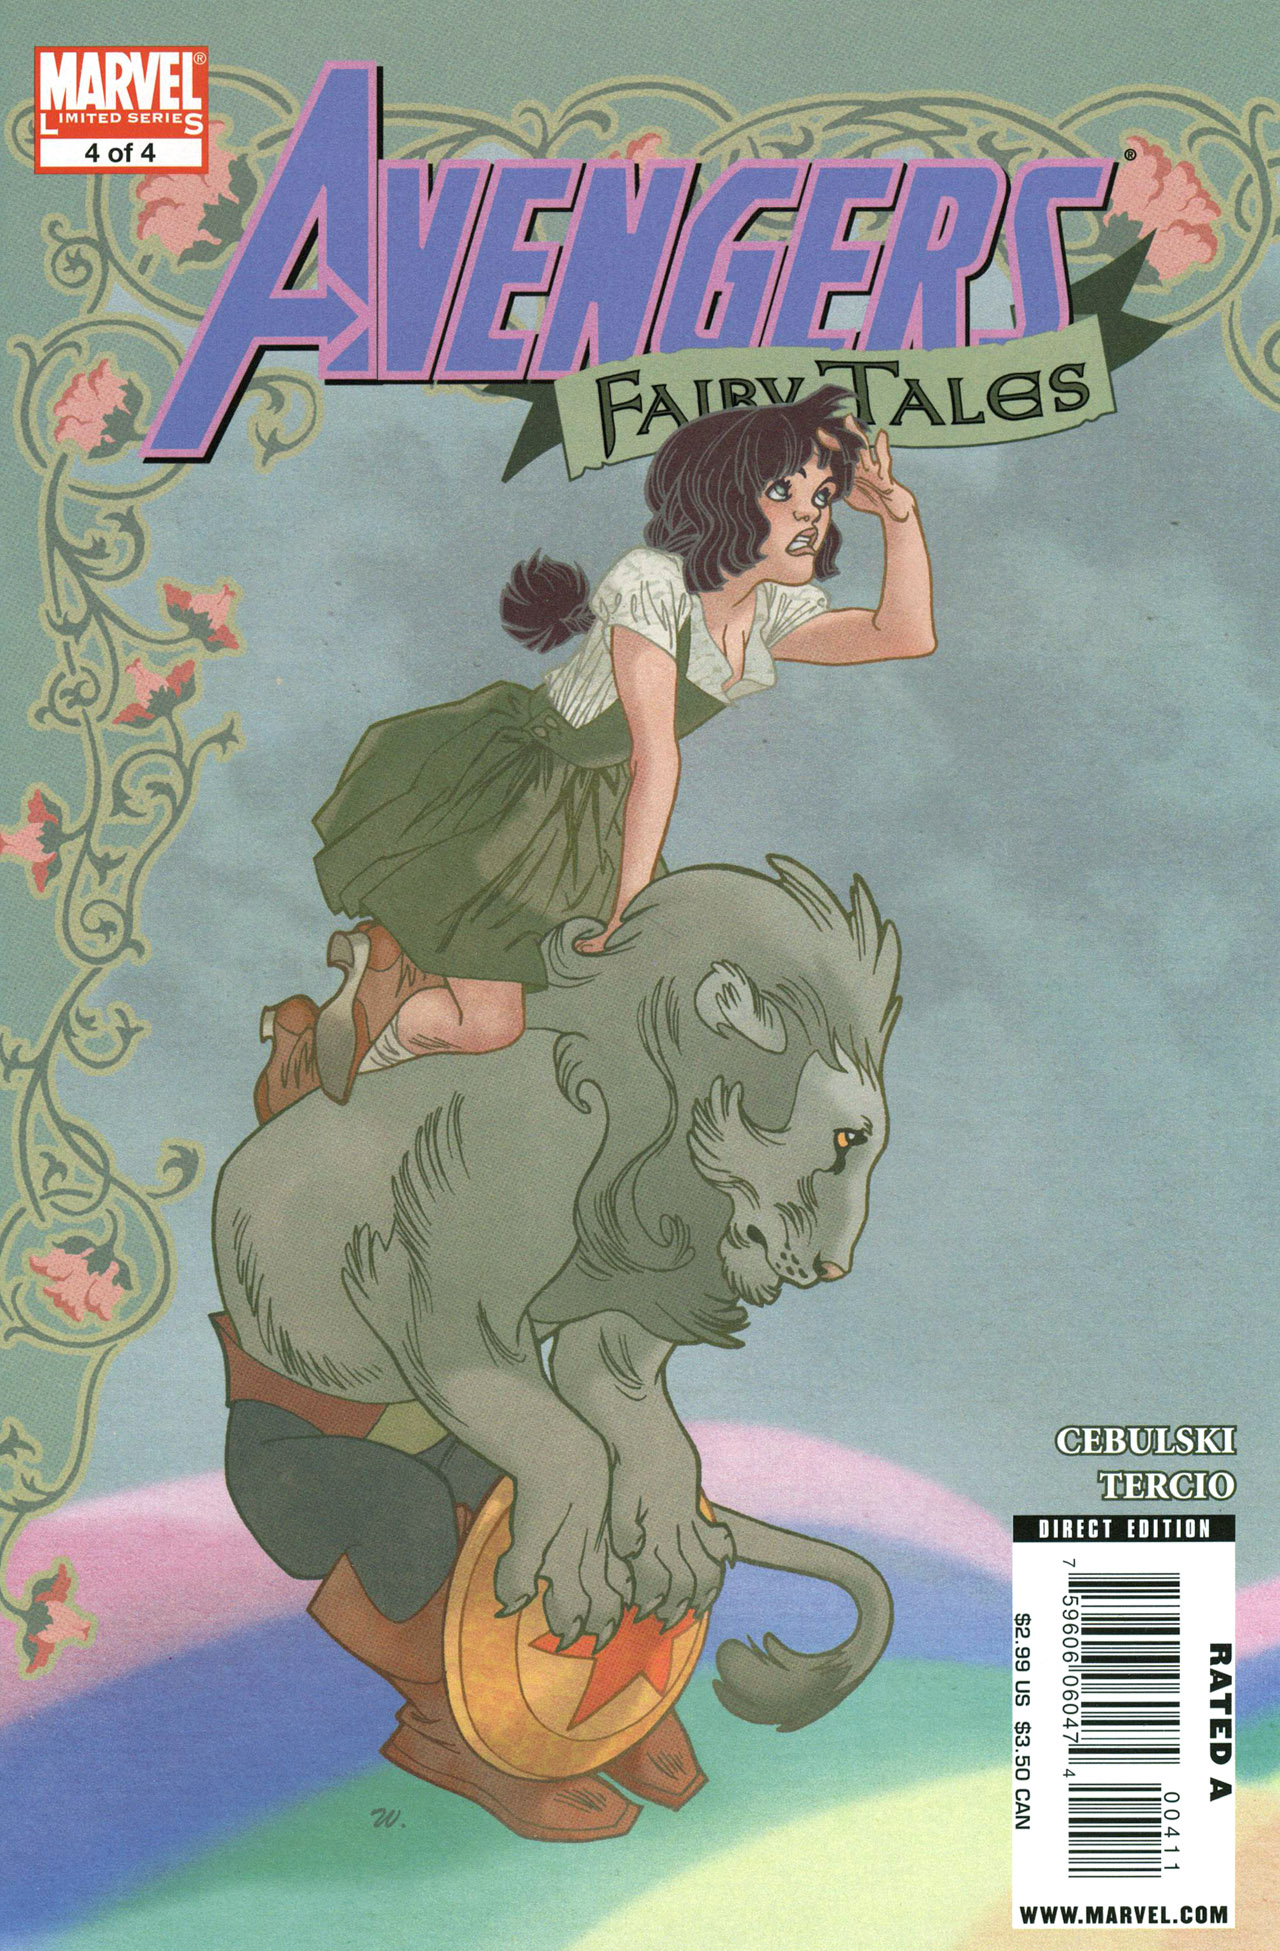 Read online Avengers Fairy Tales comic -  Issue #4 - 1